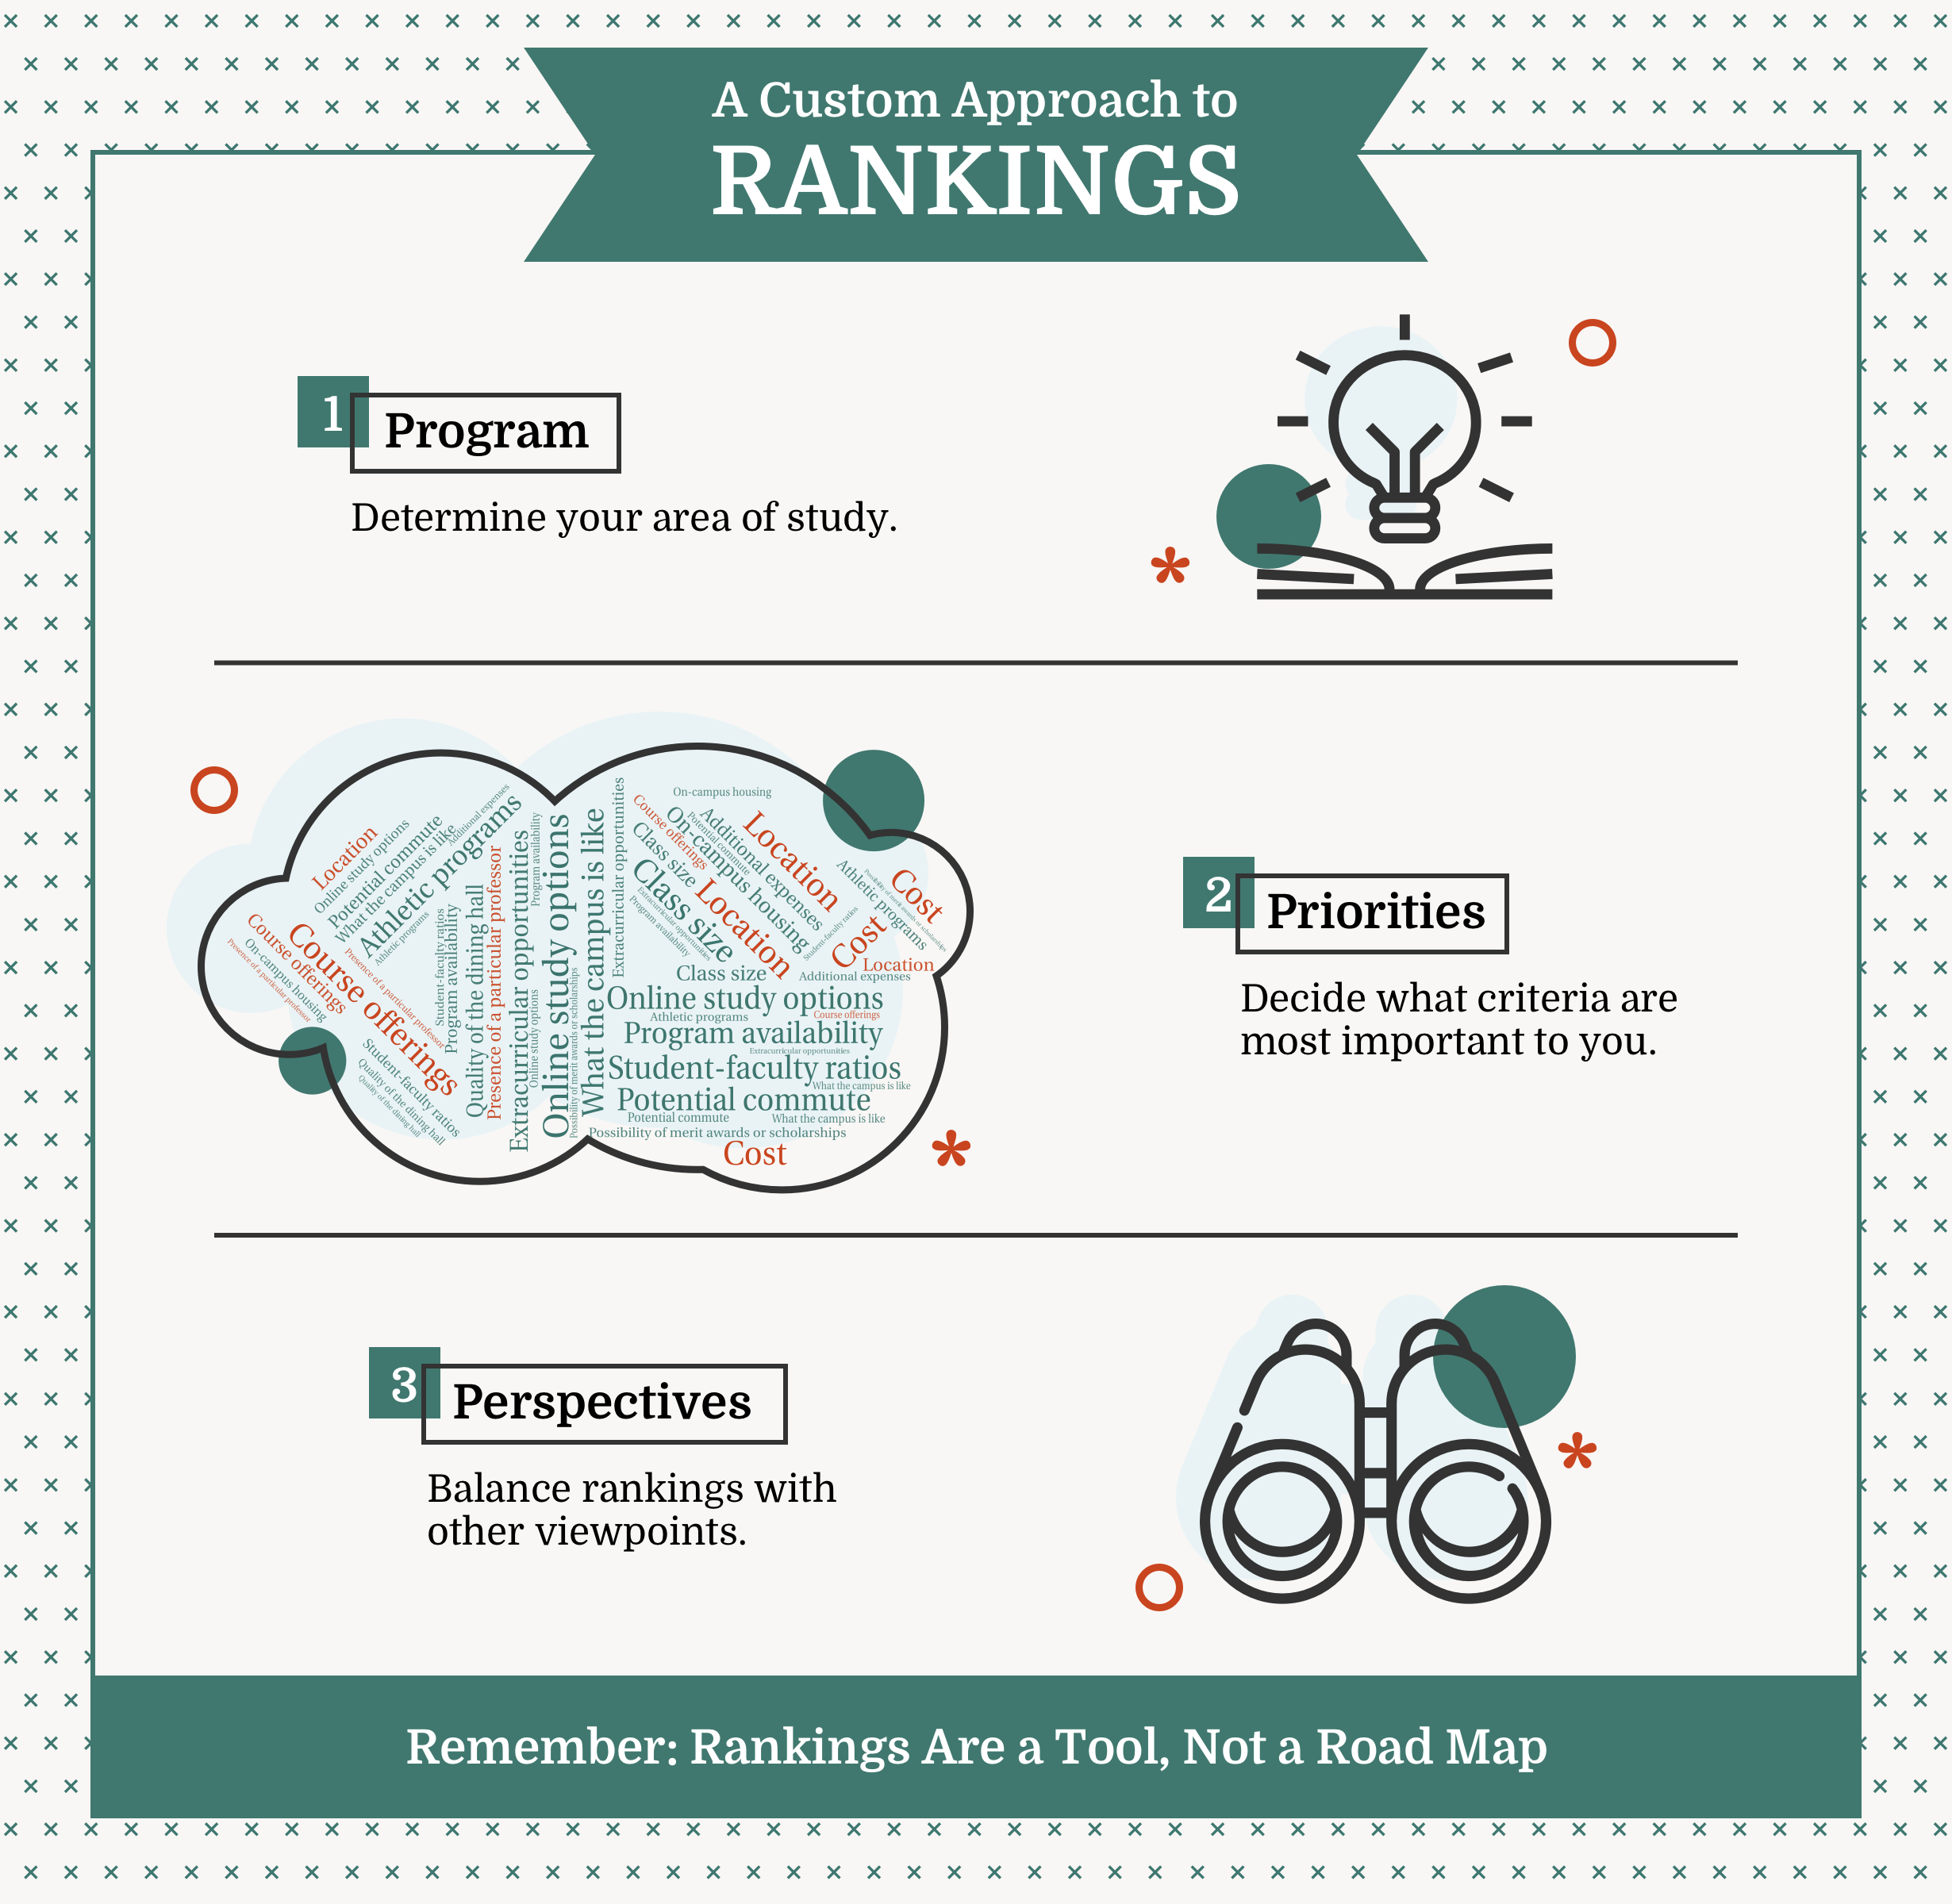 Infographic titled: 'A Custom Approach to Rankings'. 1. Program: Determine your area of study. 2. Priorities: Decide what criteria are most important to you. 3. Perspectives: Balance rankings with other viewpoints. Remember, rankings are a tool, not a roadmap.